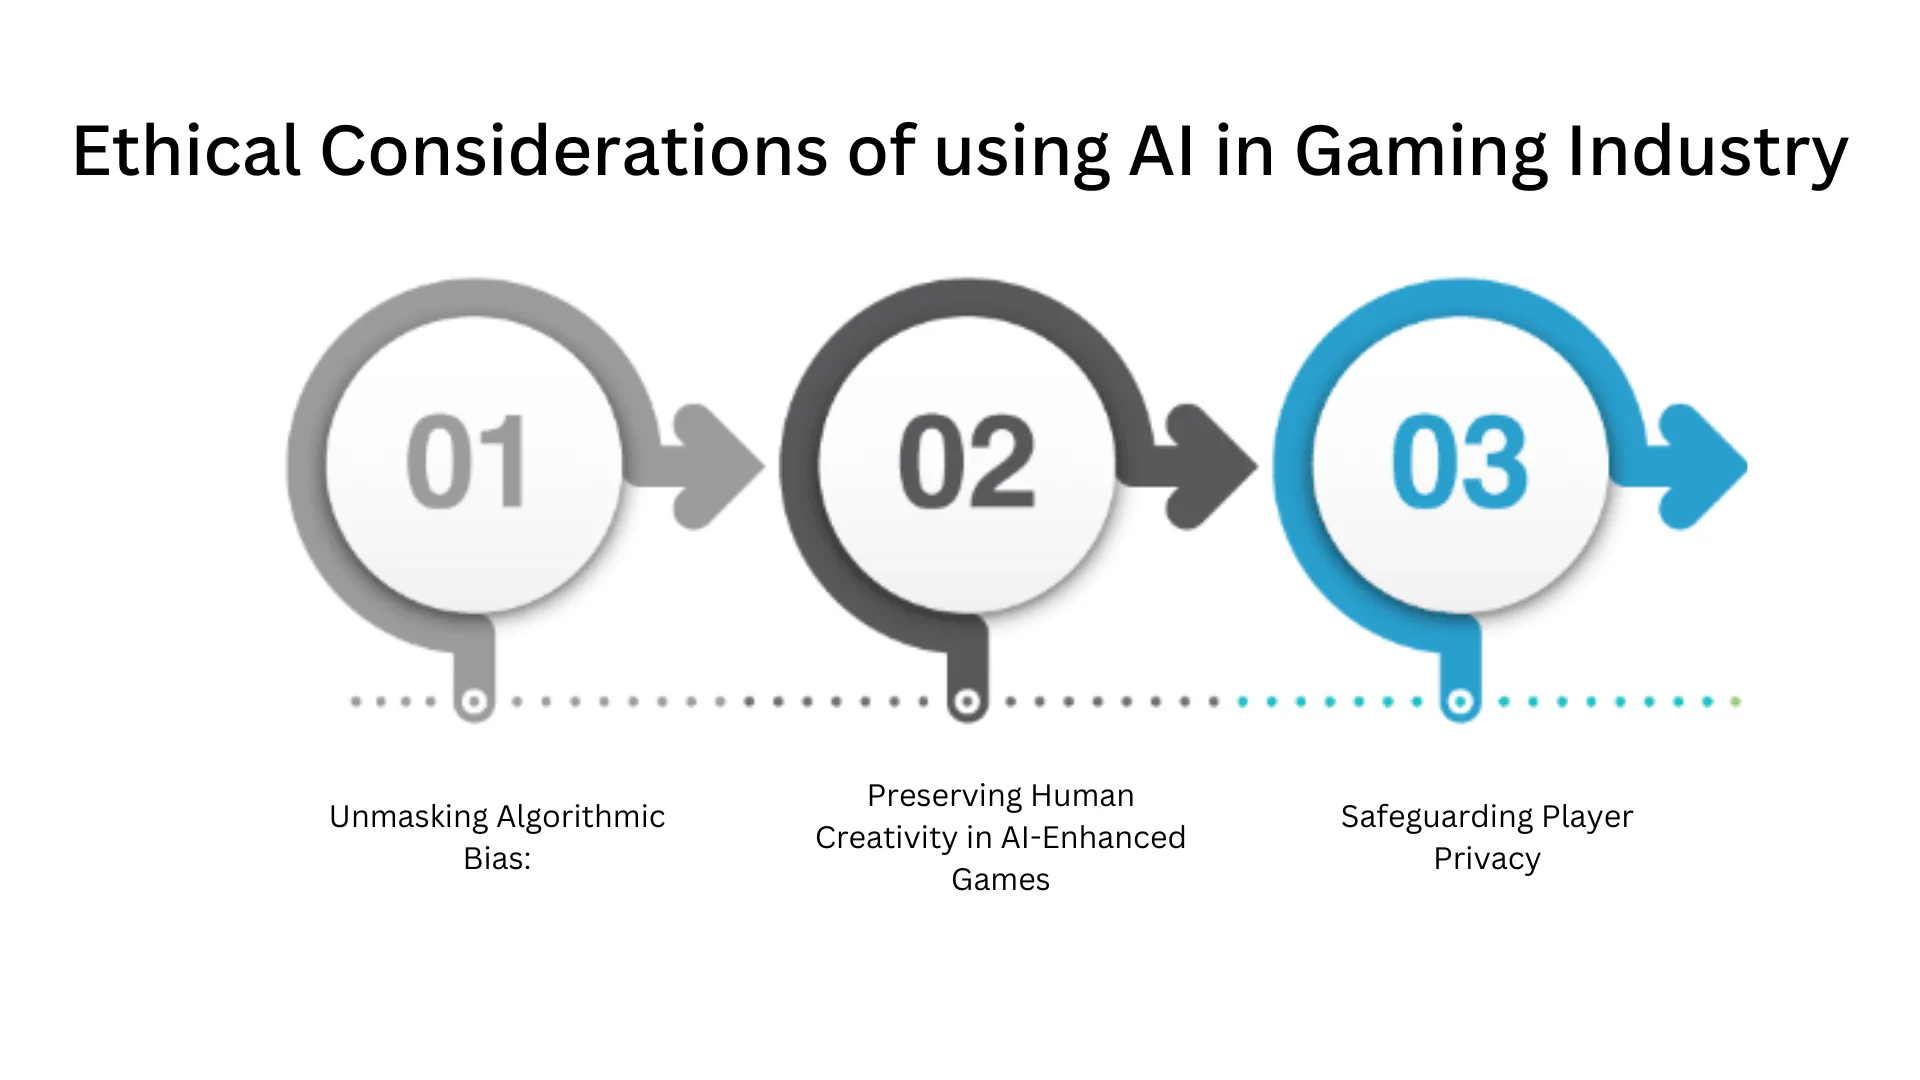 Ethical considerations of using AI in Gaming Industry